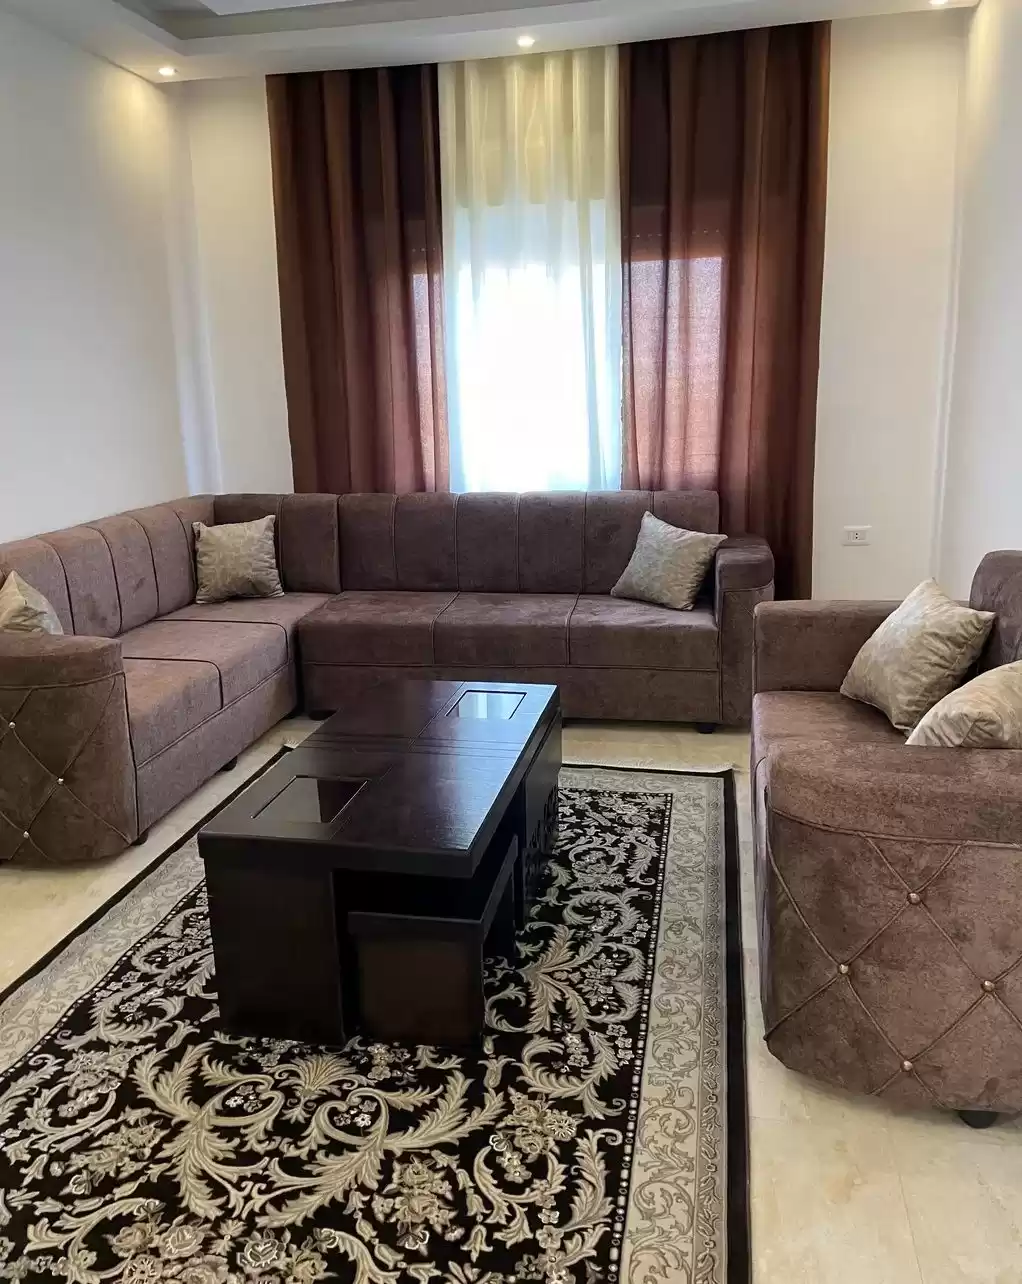 Residential Ready Property 2 Bedrooms F/F Apartment  for rent in Amman #26245 - 1  image 